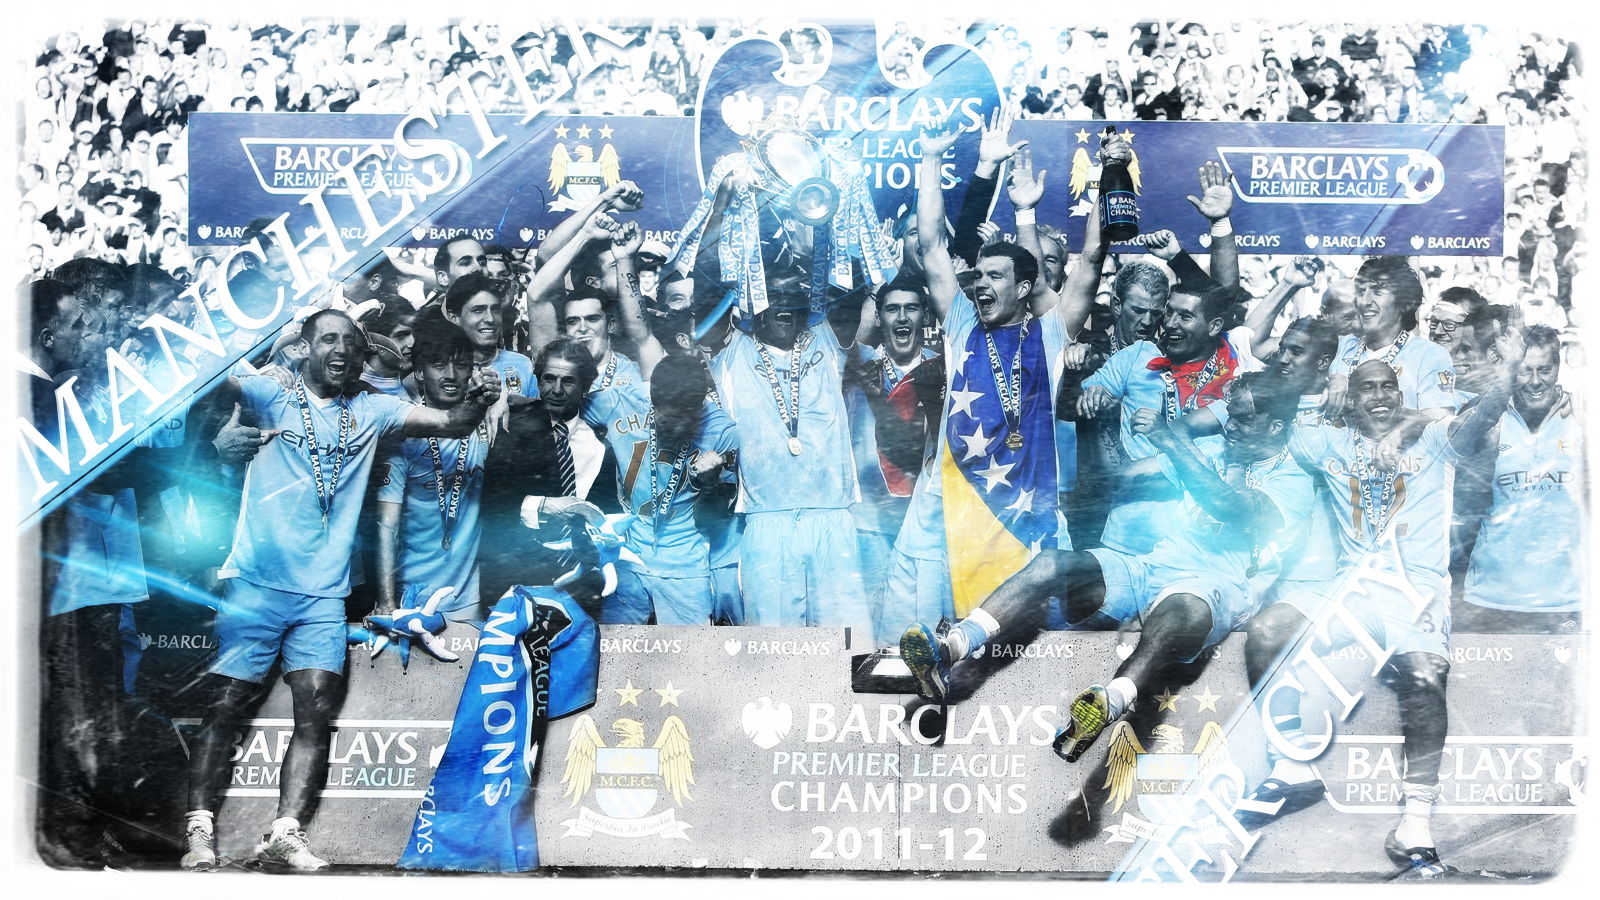 Manchester City FC Wallpaper and Windows 81 Theme All for Windows